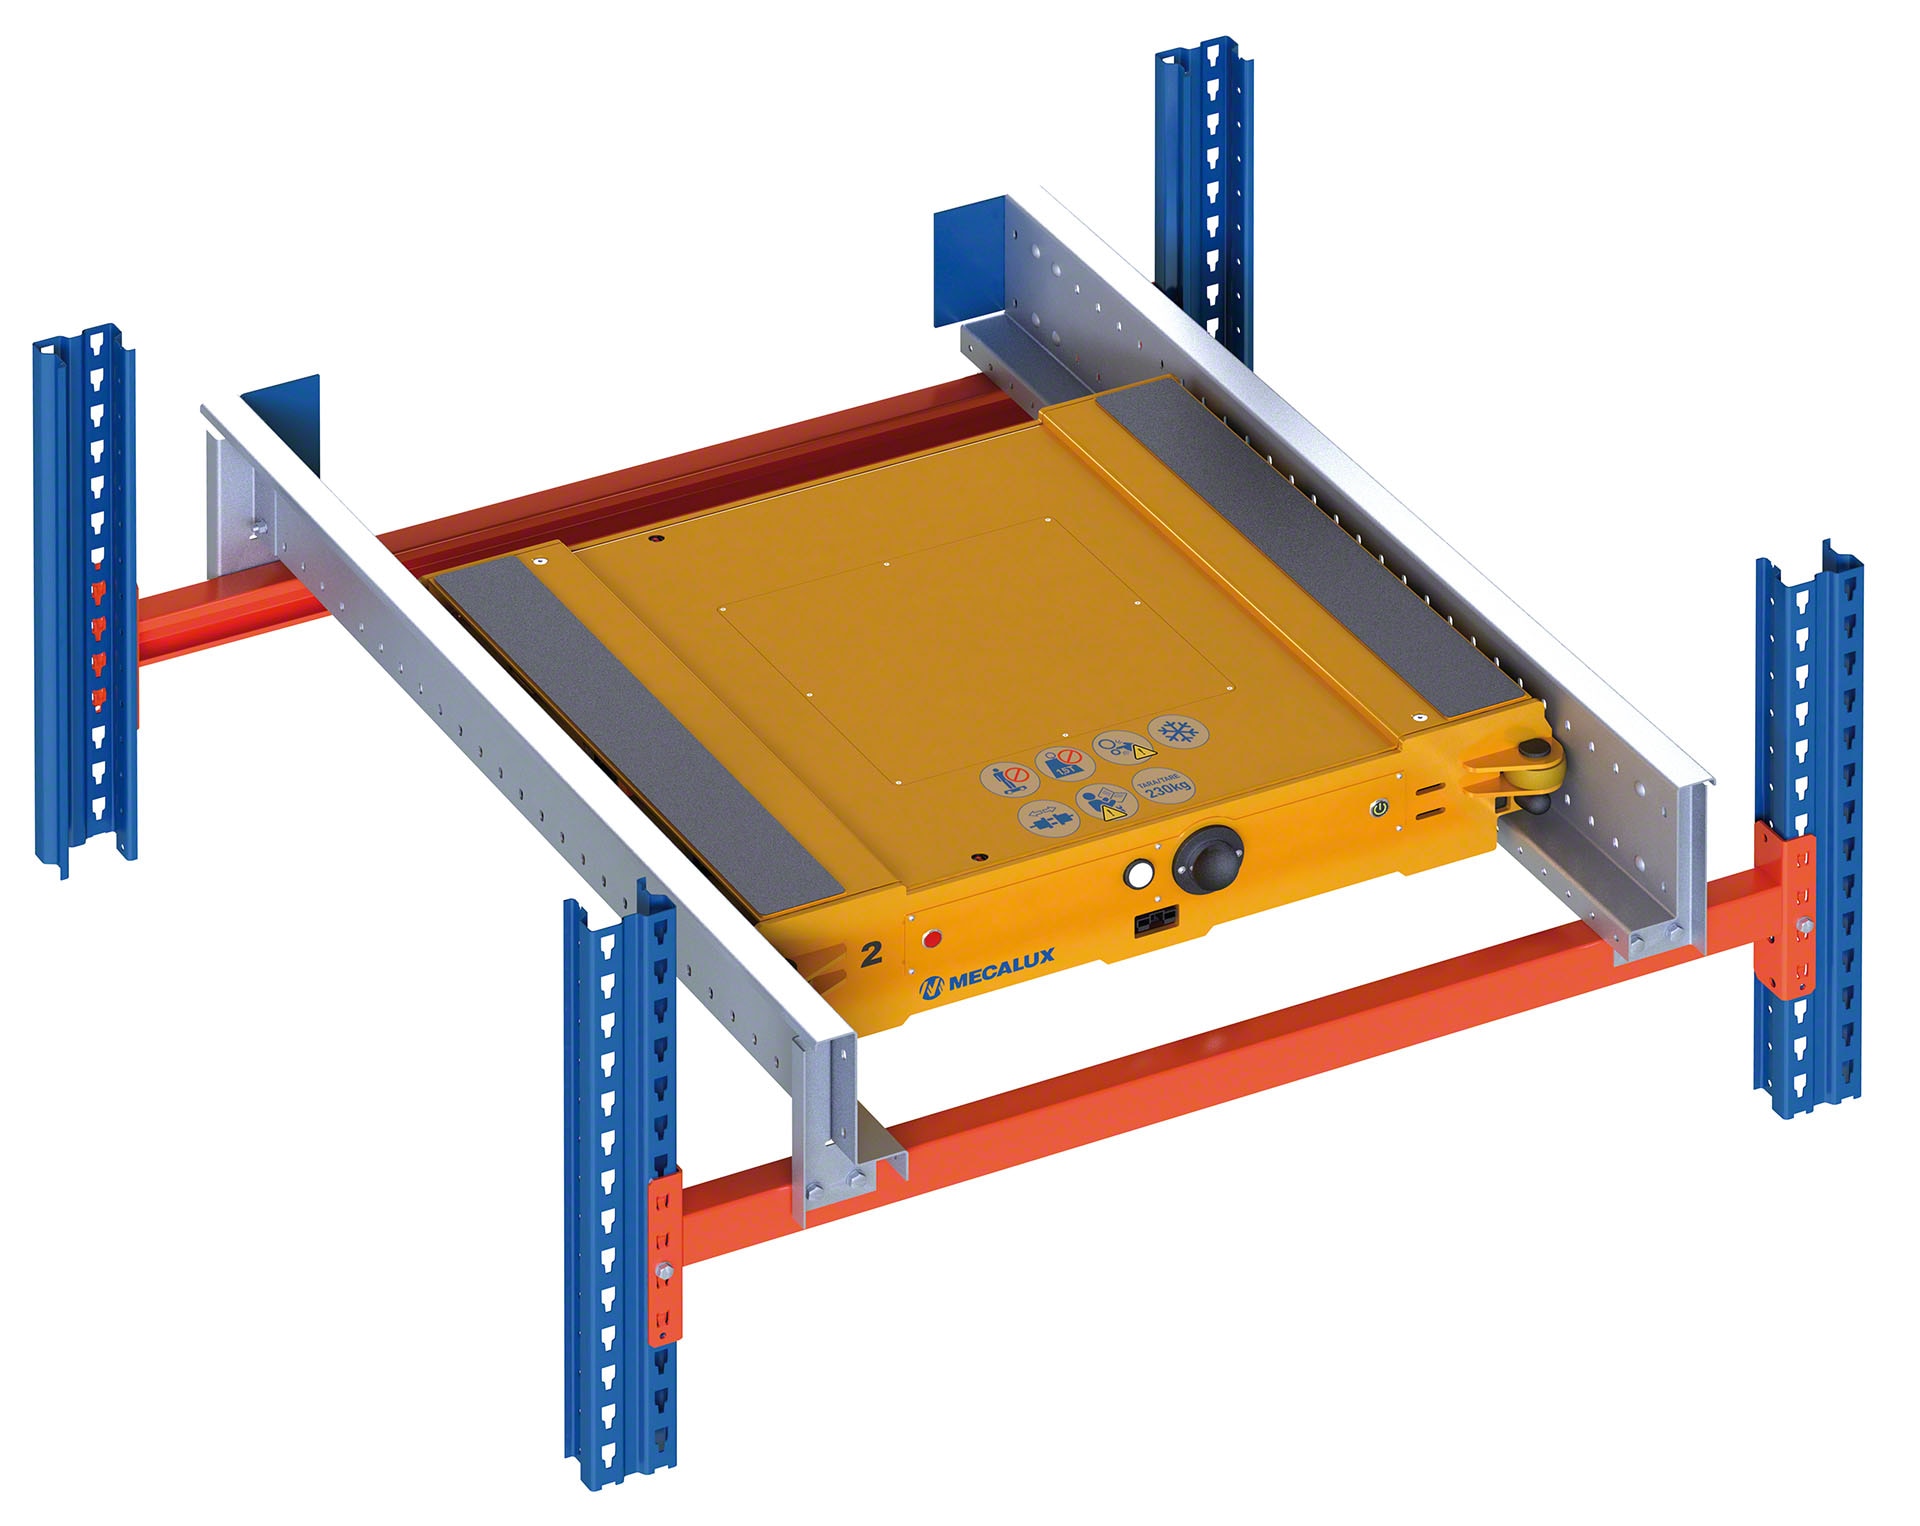 The storage channels must be adapted so that the Pallet Shuttle can be inserted into each lane